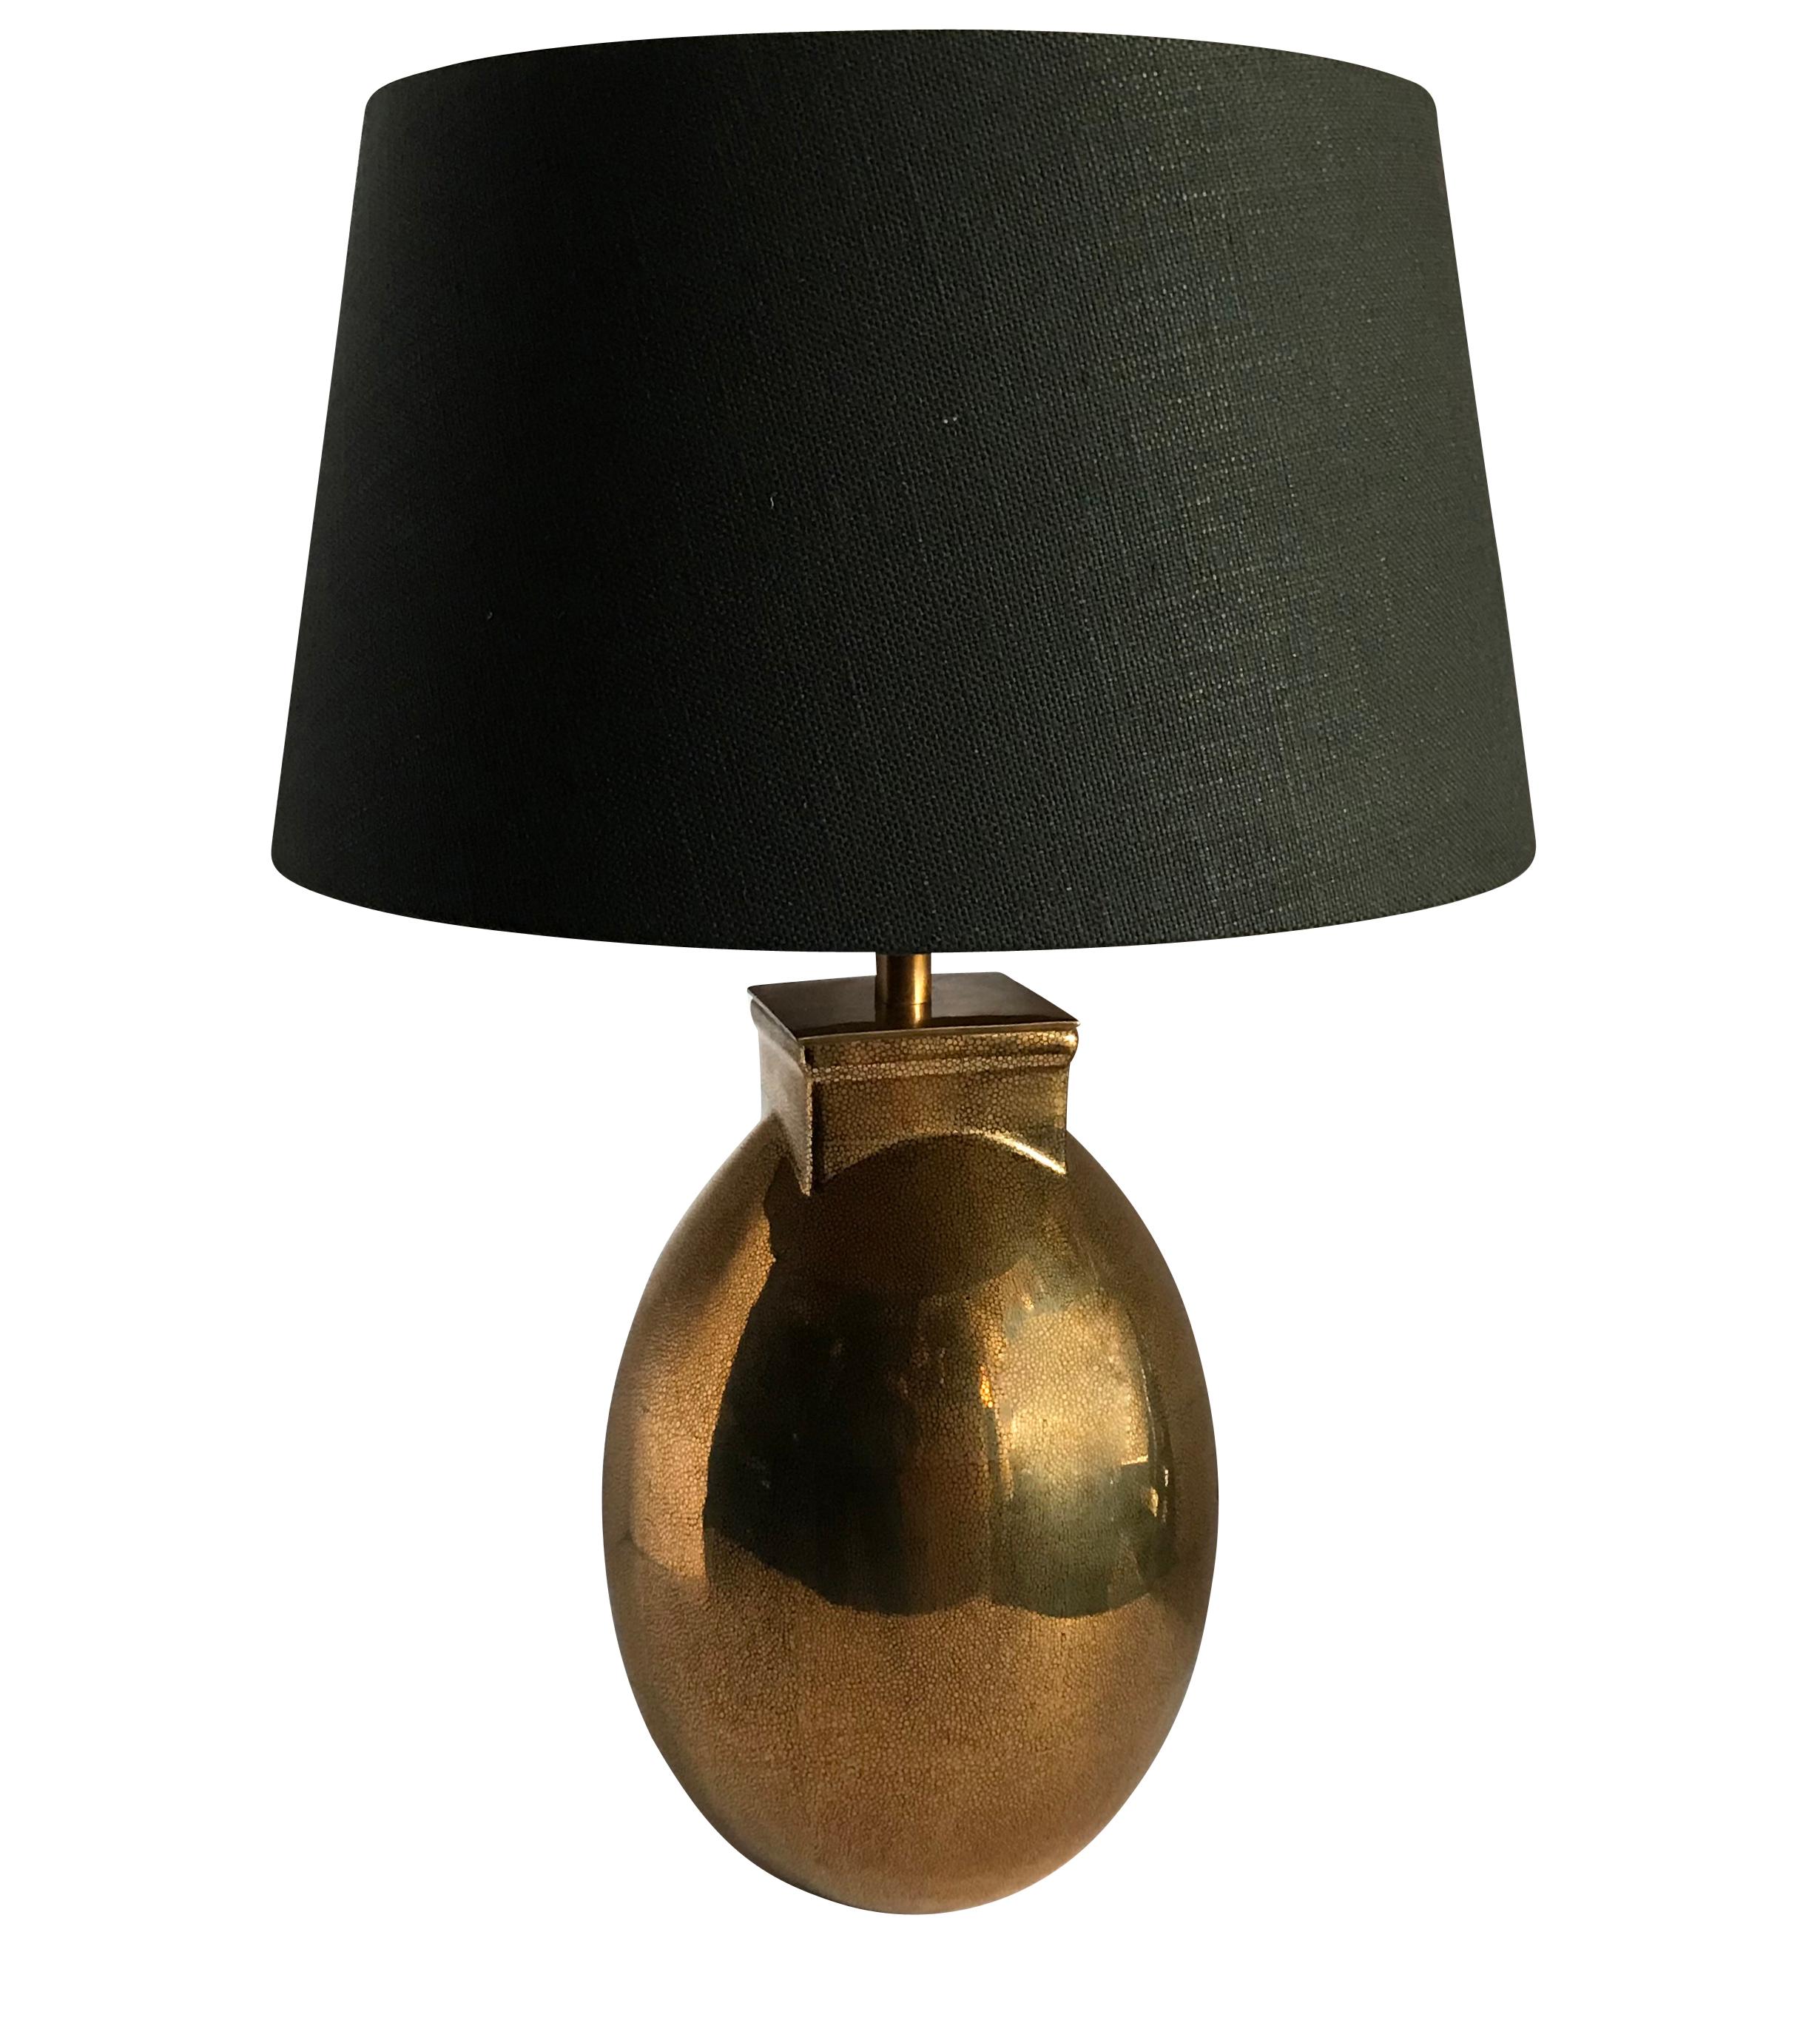 Contemporary pair faux shagreen design lamps with a metallic/brass color
Round lamps with square top
Black linen shades with gold interior lining
Measures: Shade is 16